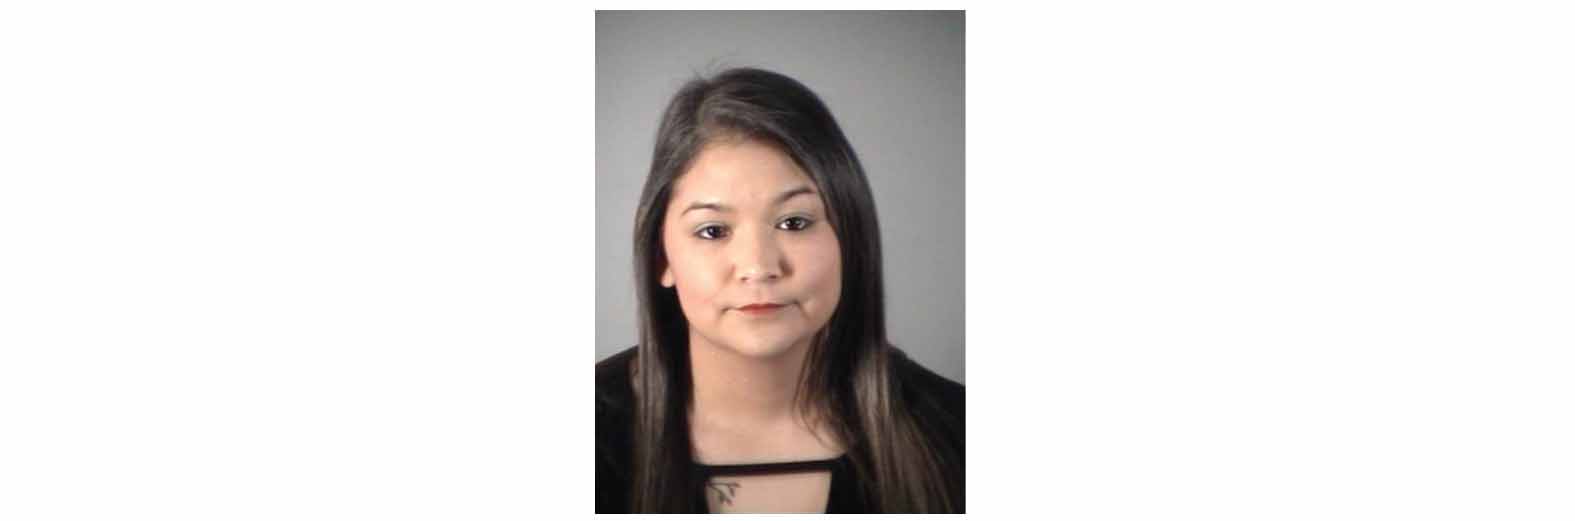 LCSO Corrections Officer Booked Into Same Jail Where She Worked — Bonds